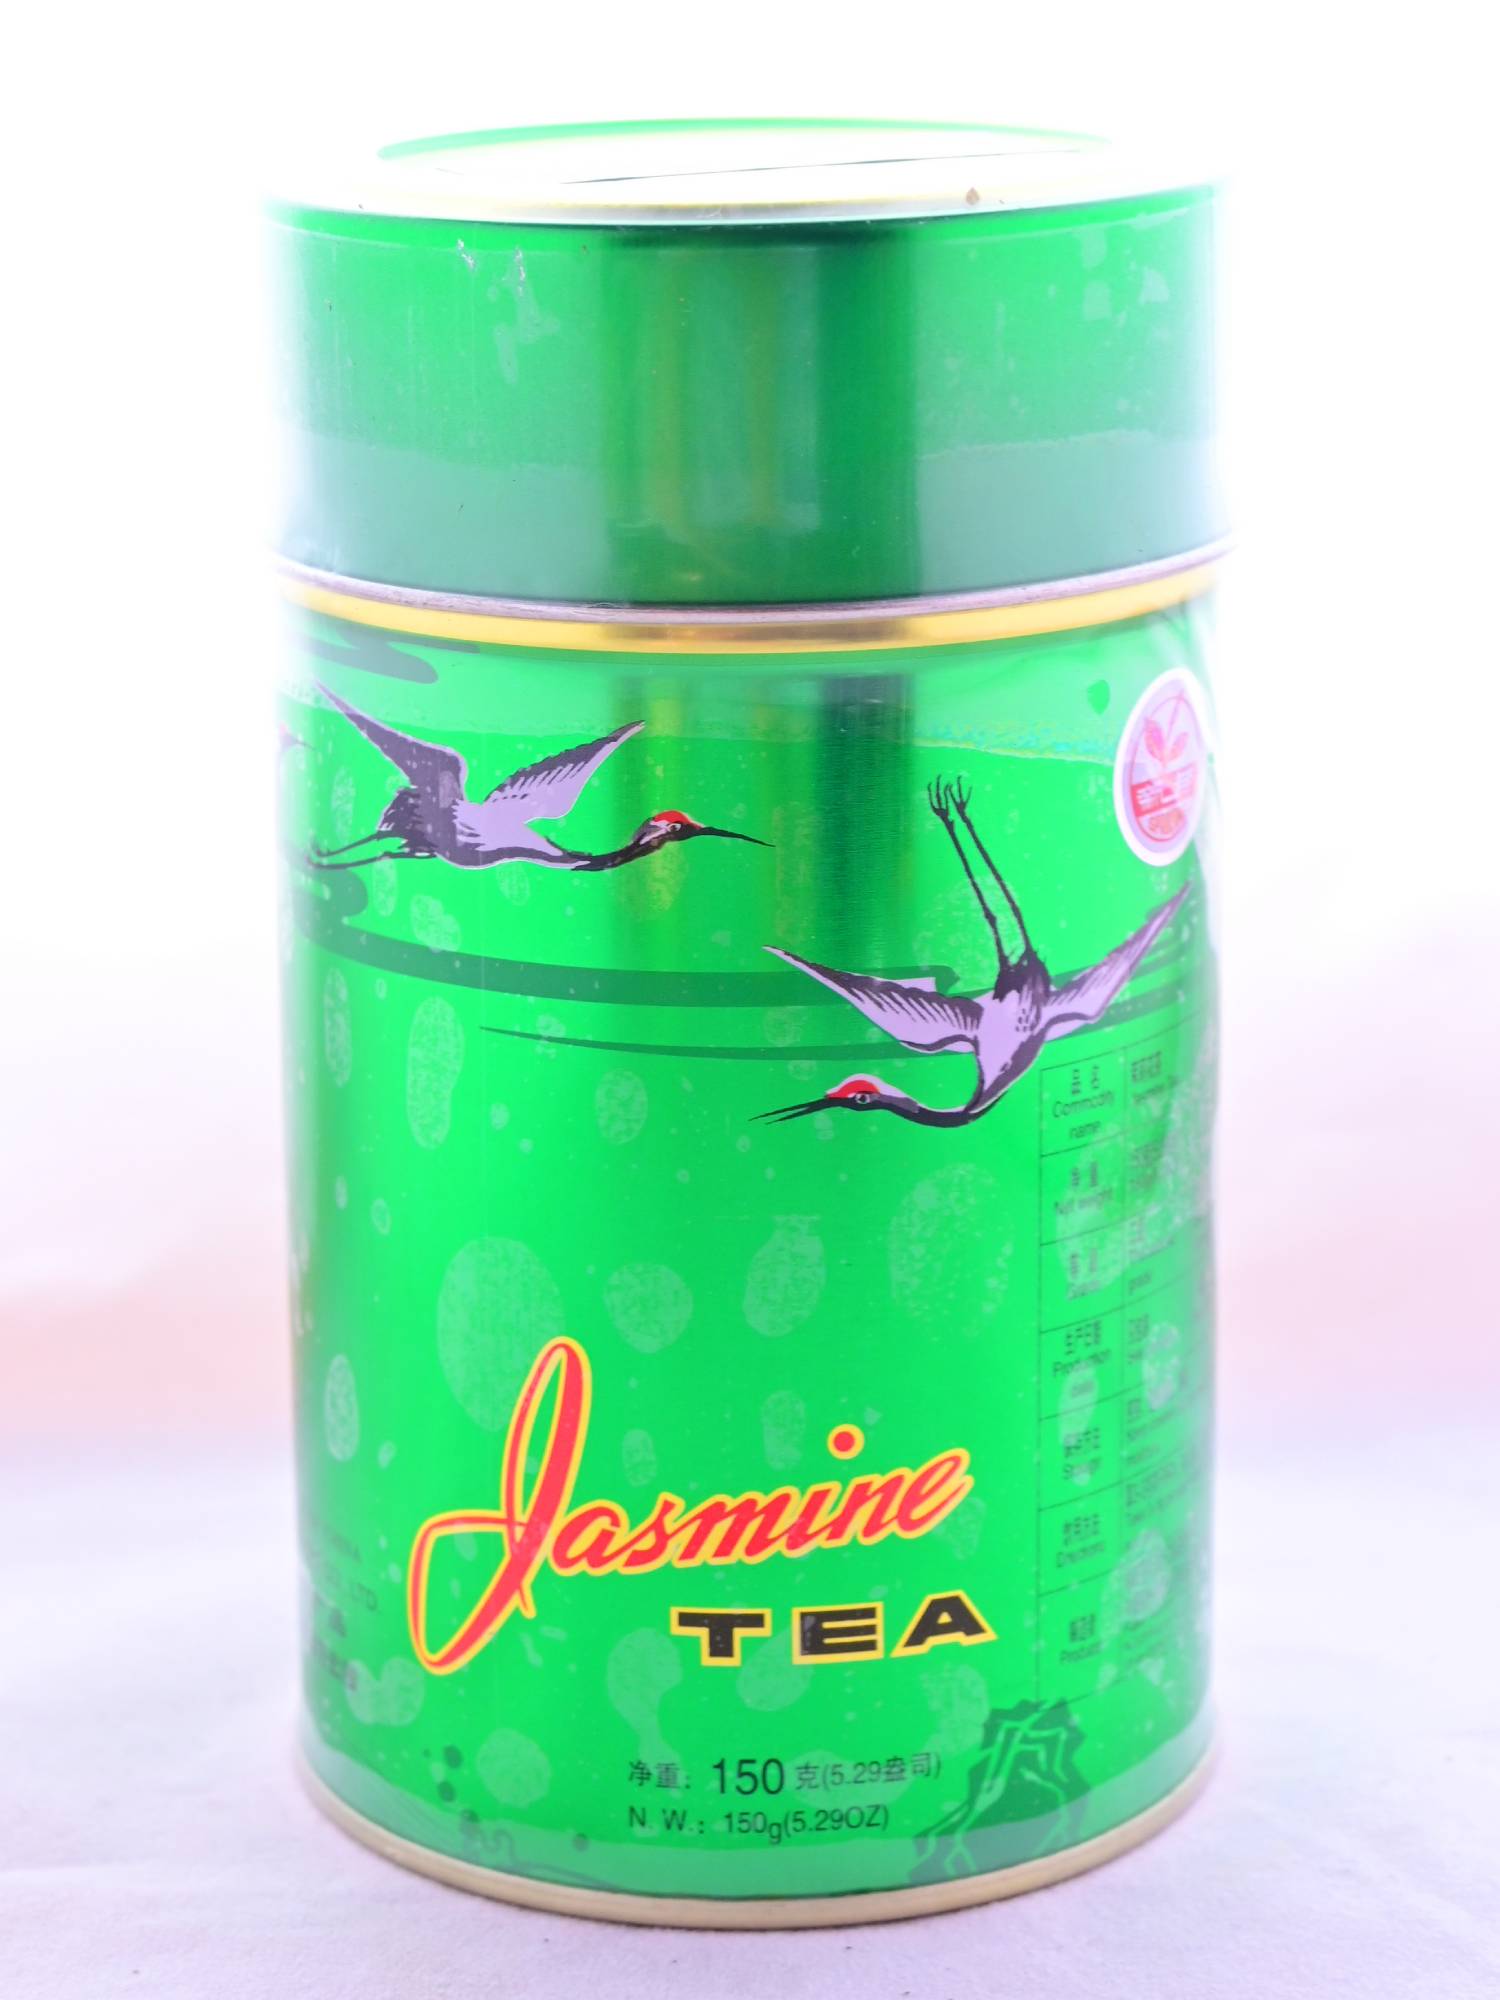 The metal Moli Hua Cha large tin is neon green, with storks flying along the top of the cylindrical canister. Toward the bottom, red and black text outlined in yellow reads: "Jasmine Tea. 150 g."